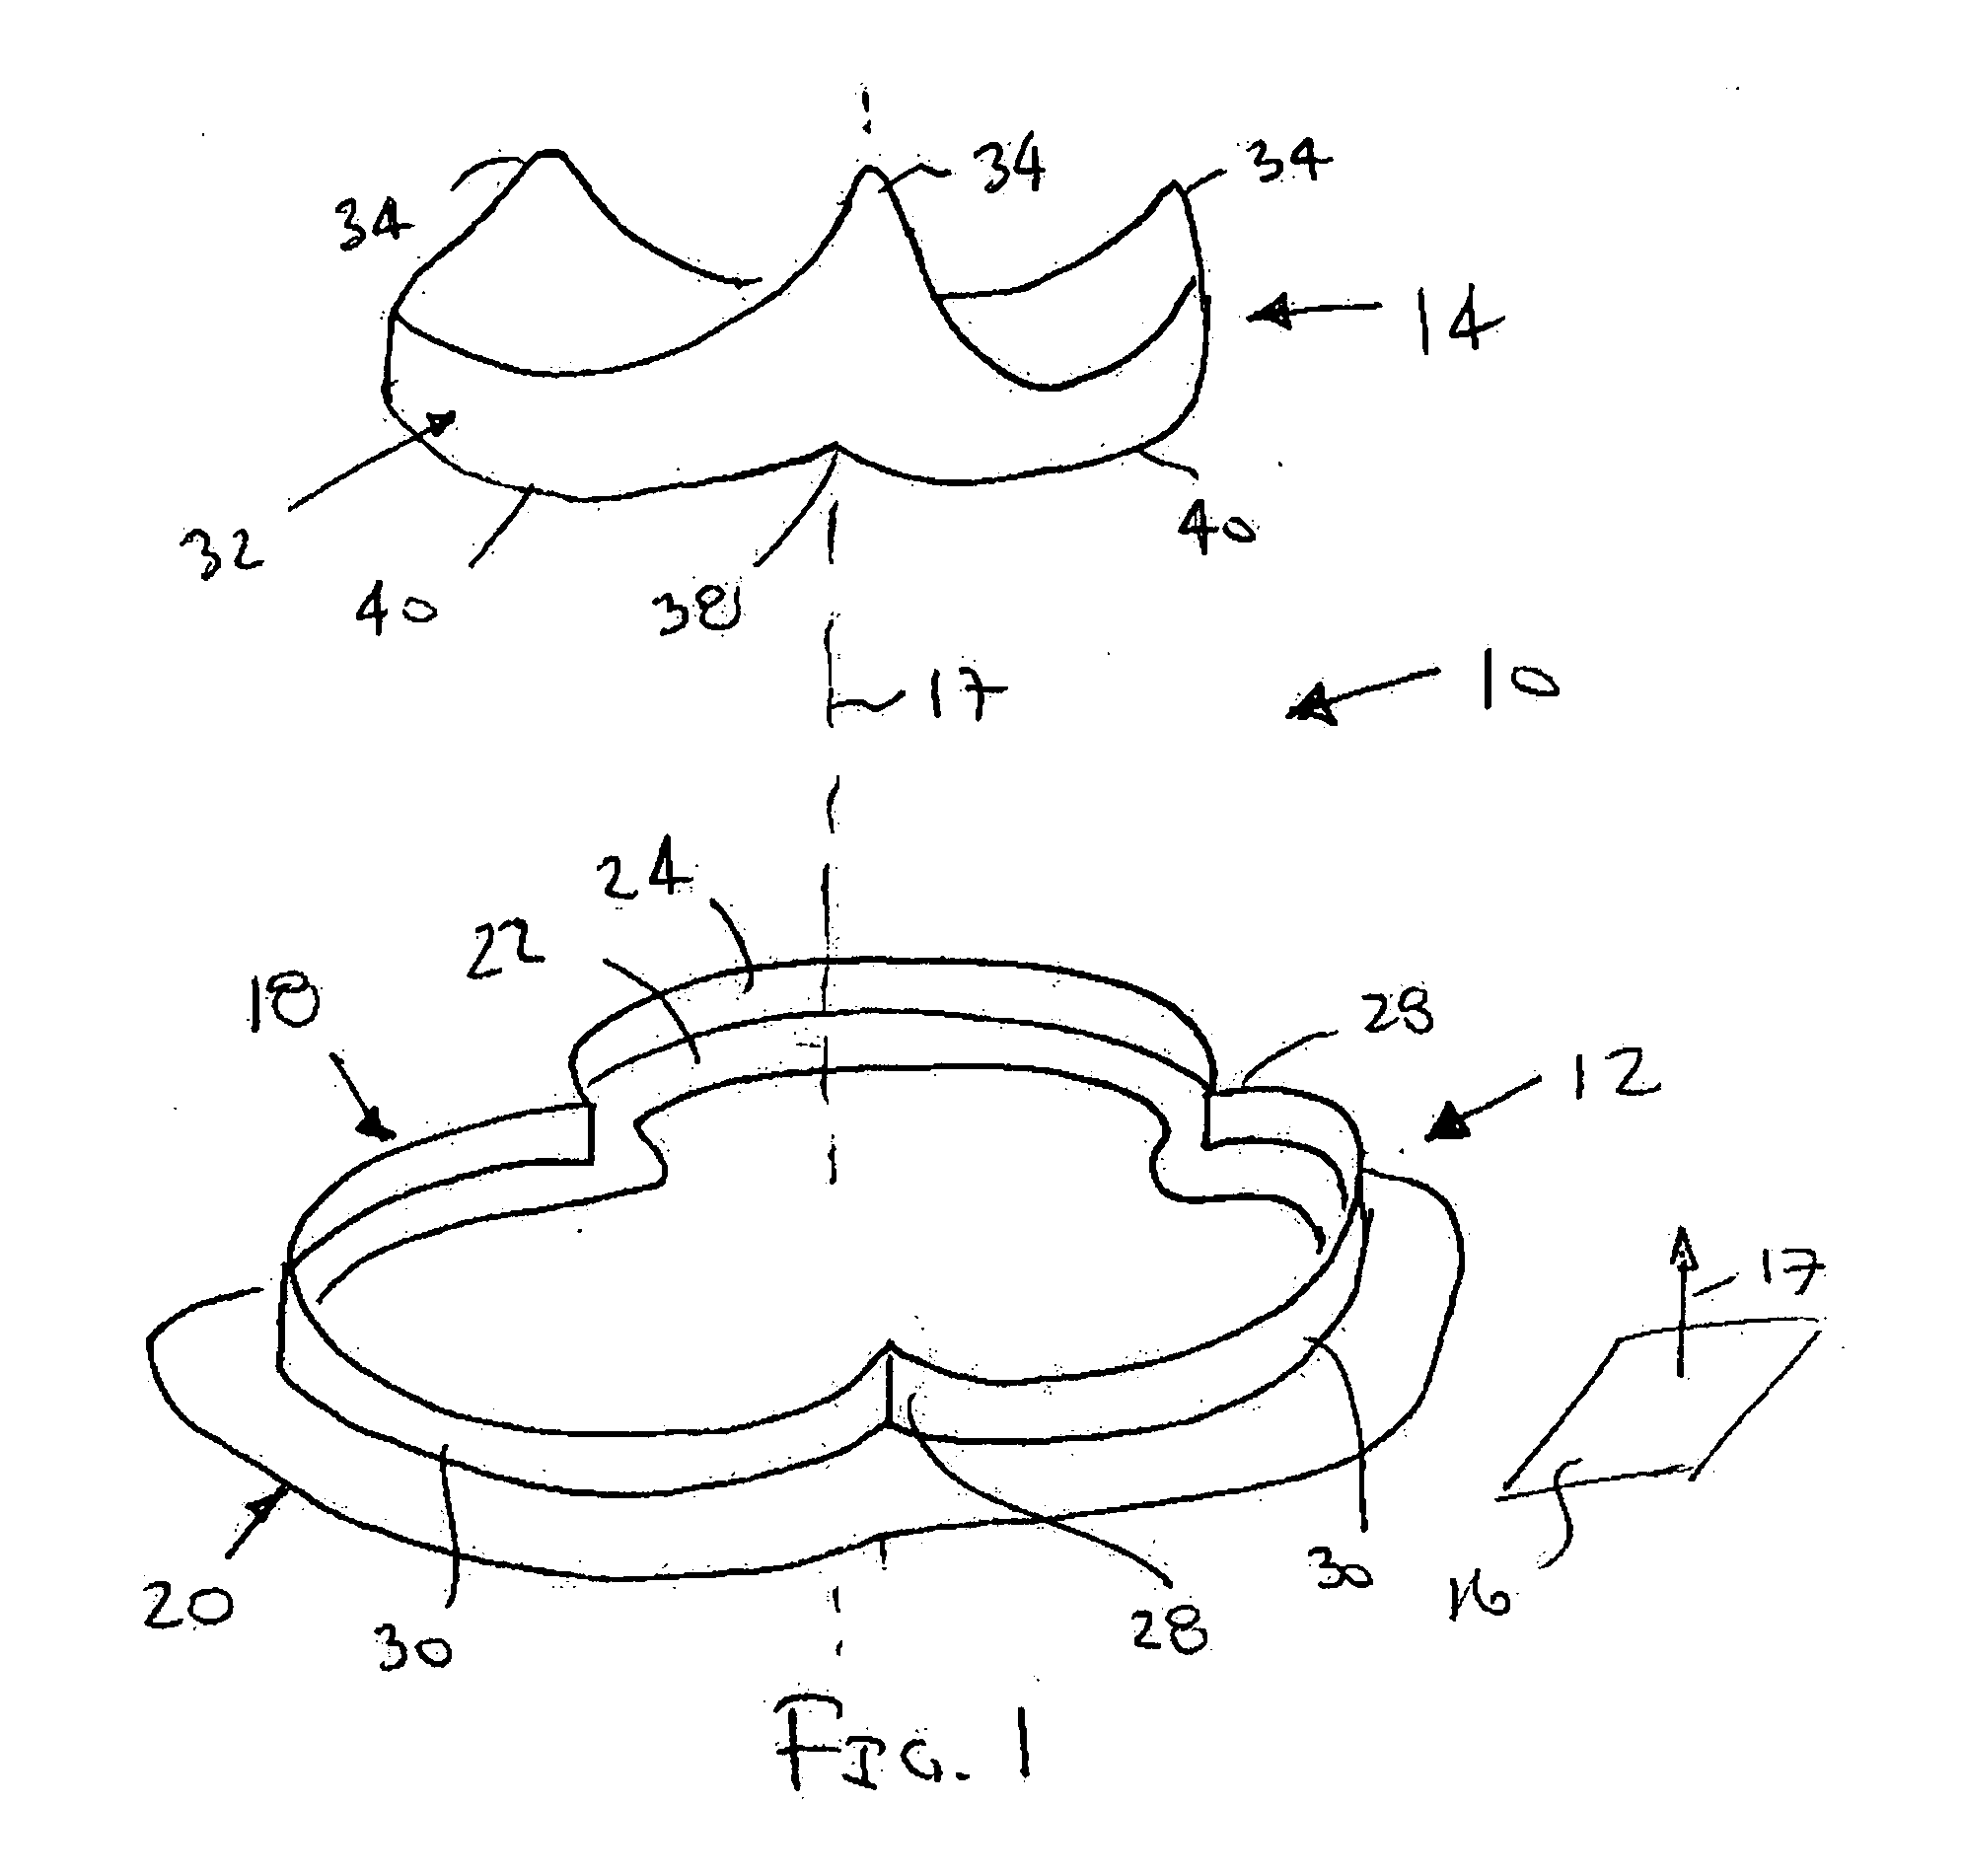 Conformable prosthesis for implanting two-piece heart valves and methods for using them